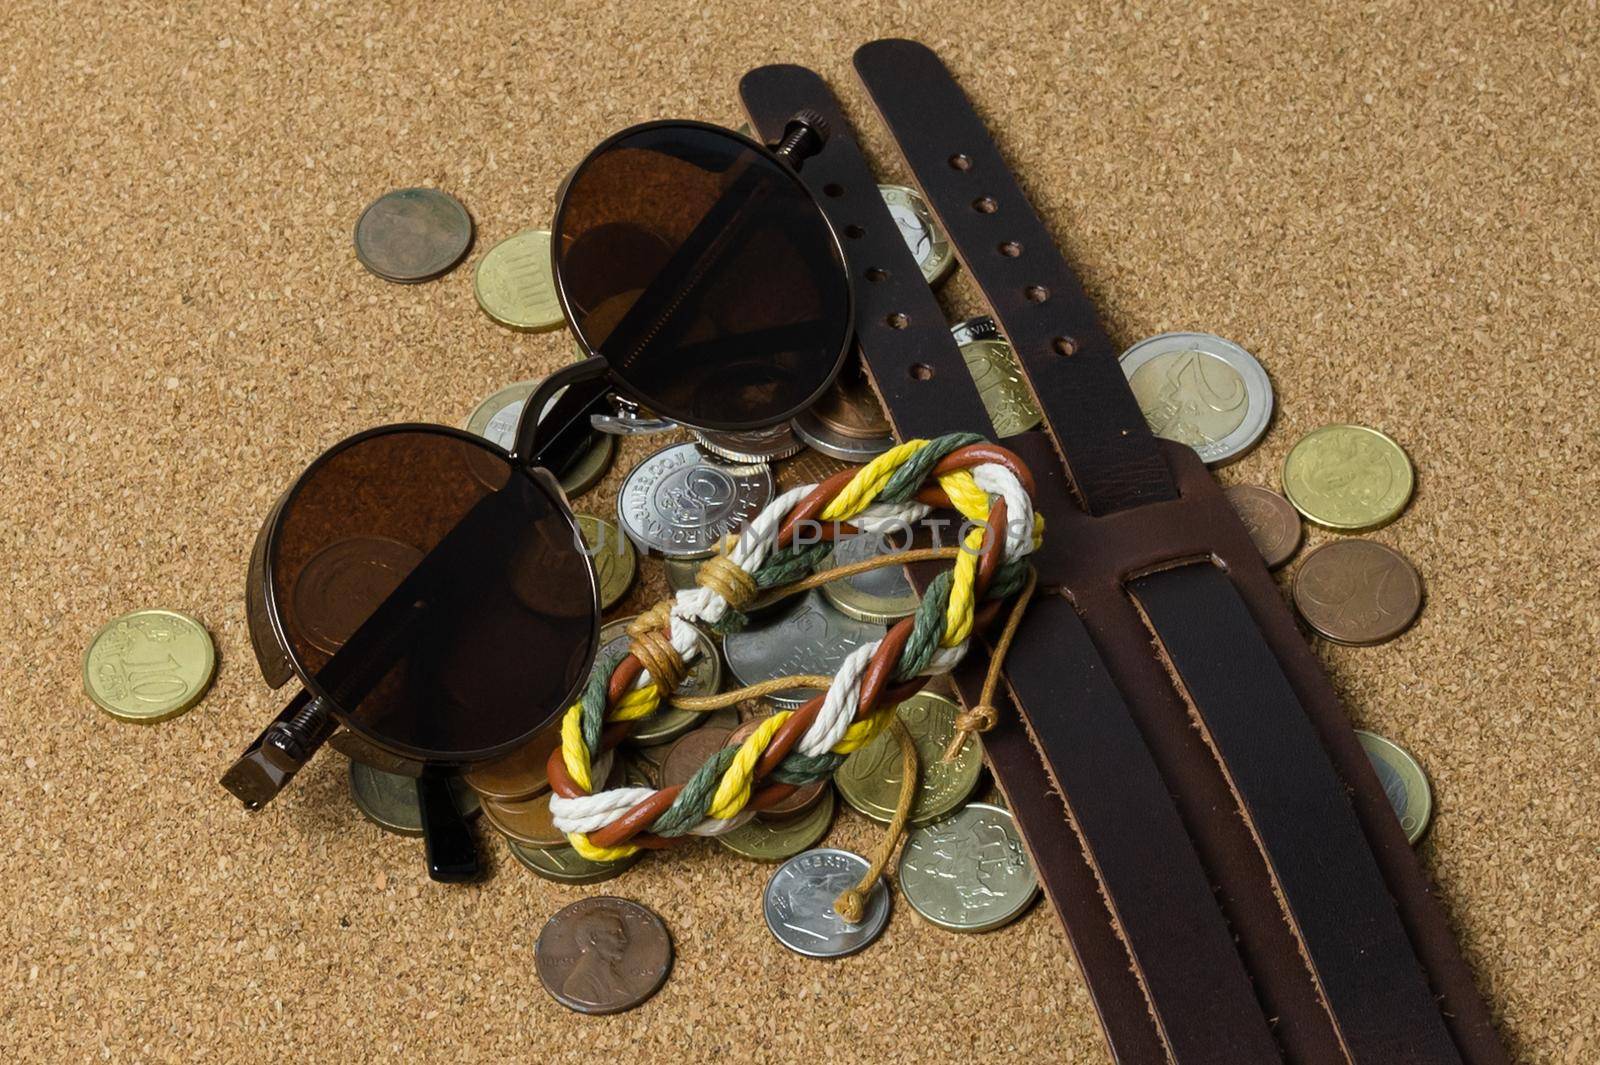 sun glasses with various bracelets and coins rest casually on the light brown leather on a flat surface